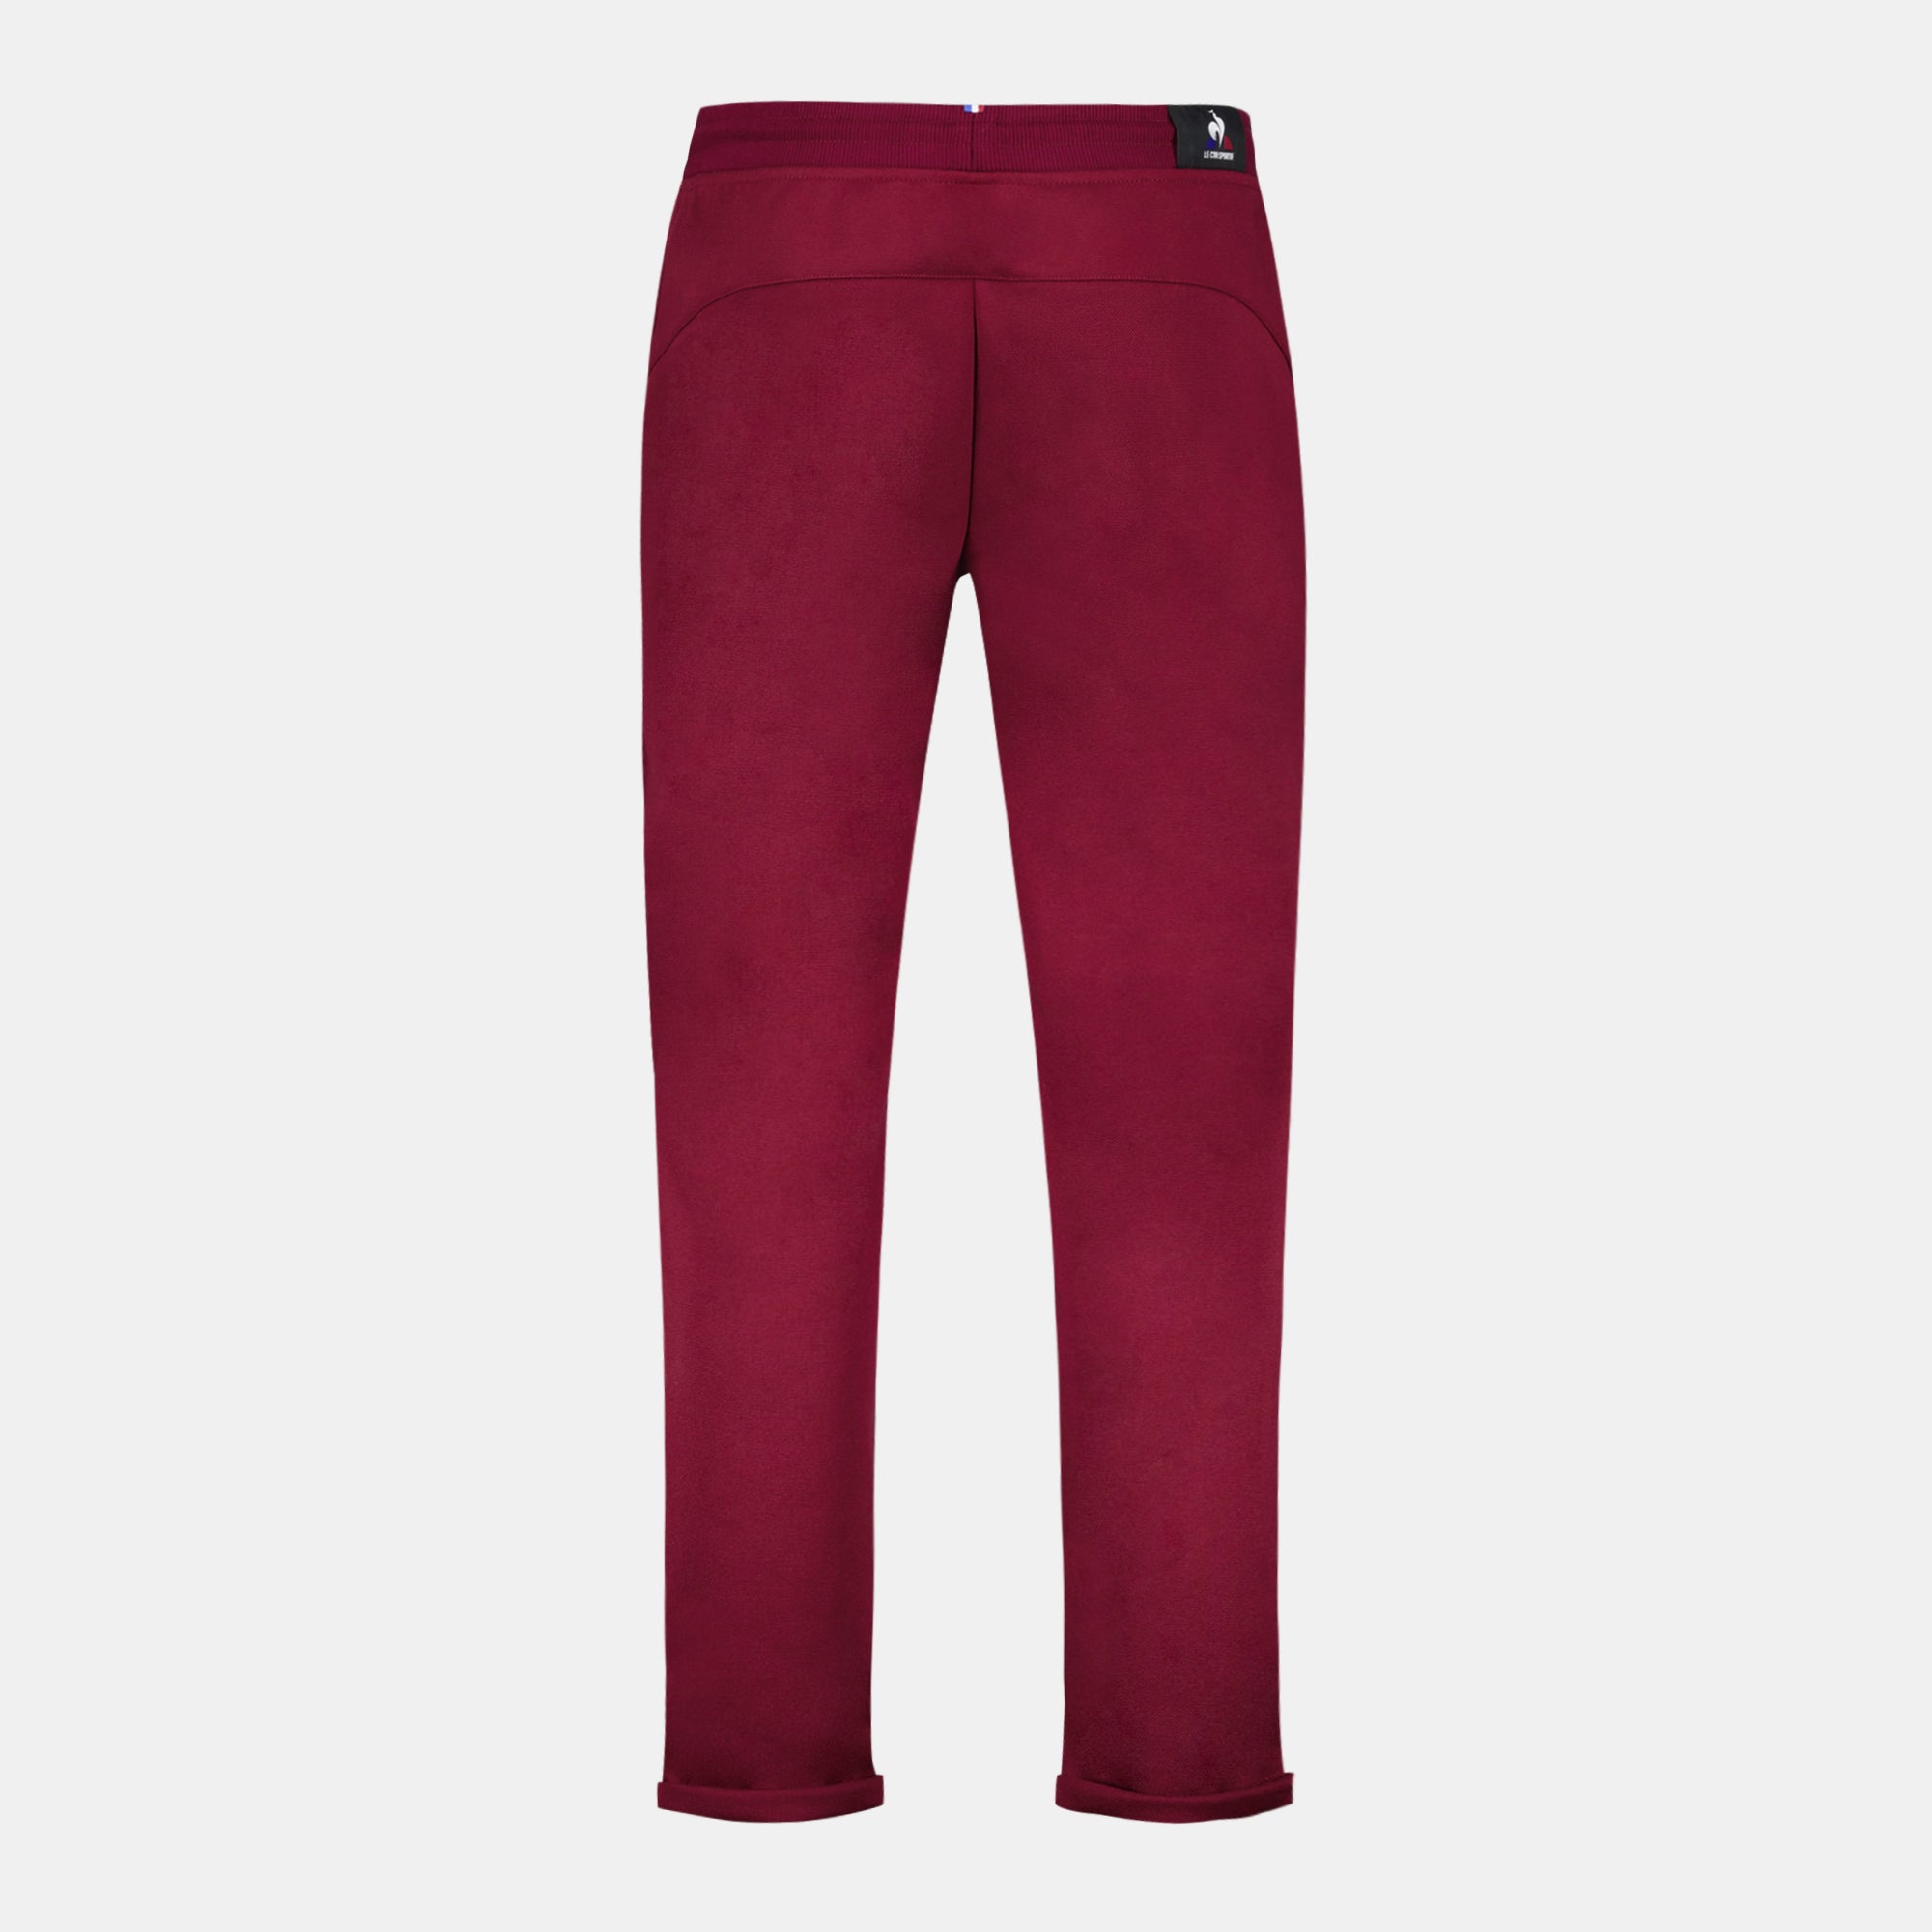 2410766-ESS T/T Pant Carotte N°2 M rambo red  | Trousers coupe carotte for men